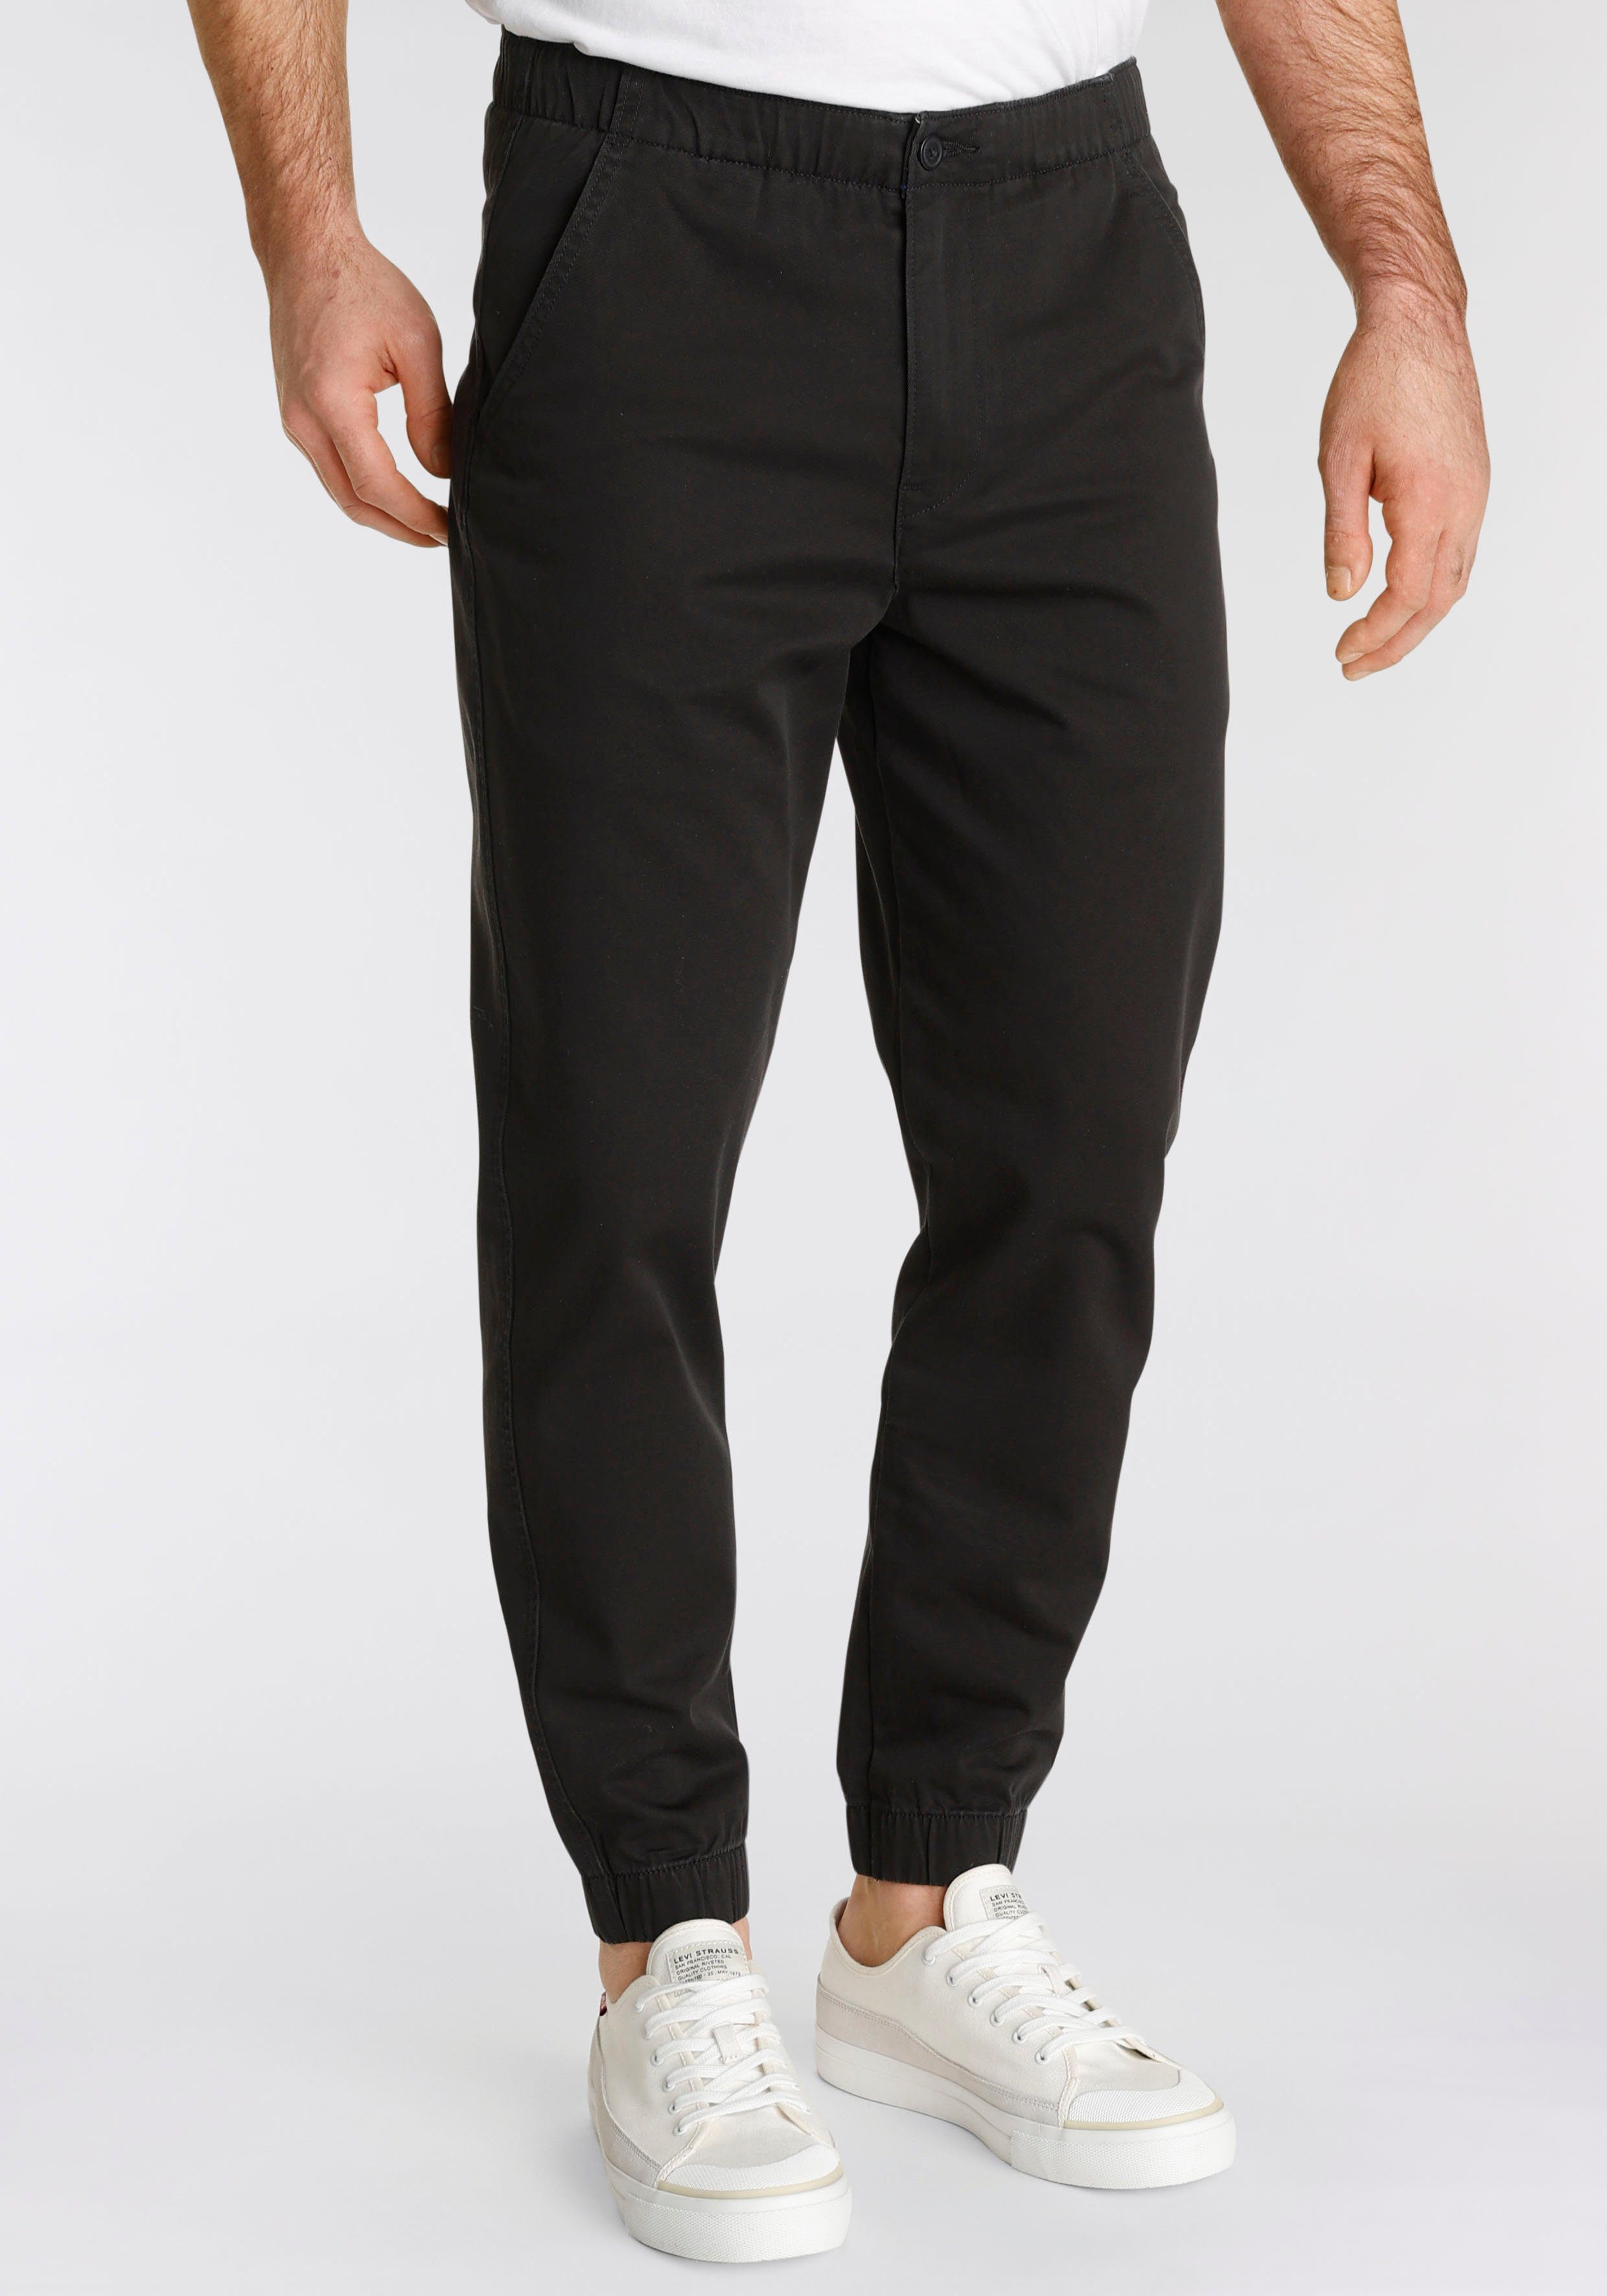 für LE Levi's® Styling Chinohose XX in Unifarbe schwarz III leichtes JOGGER CHINO